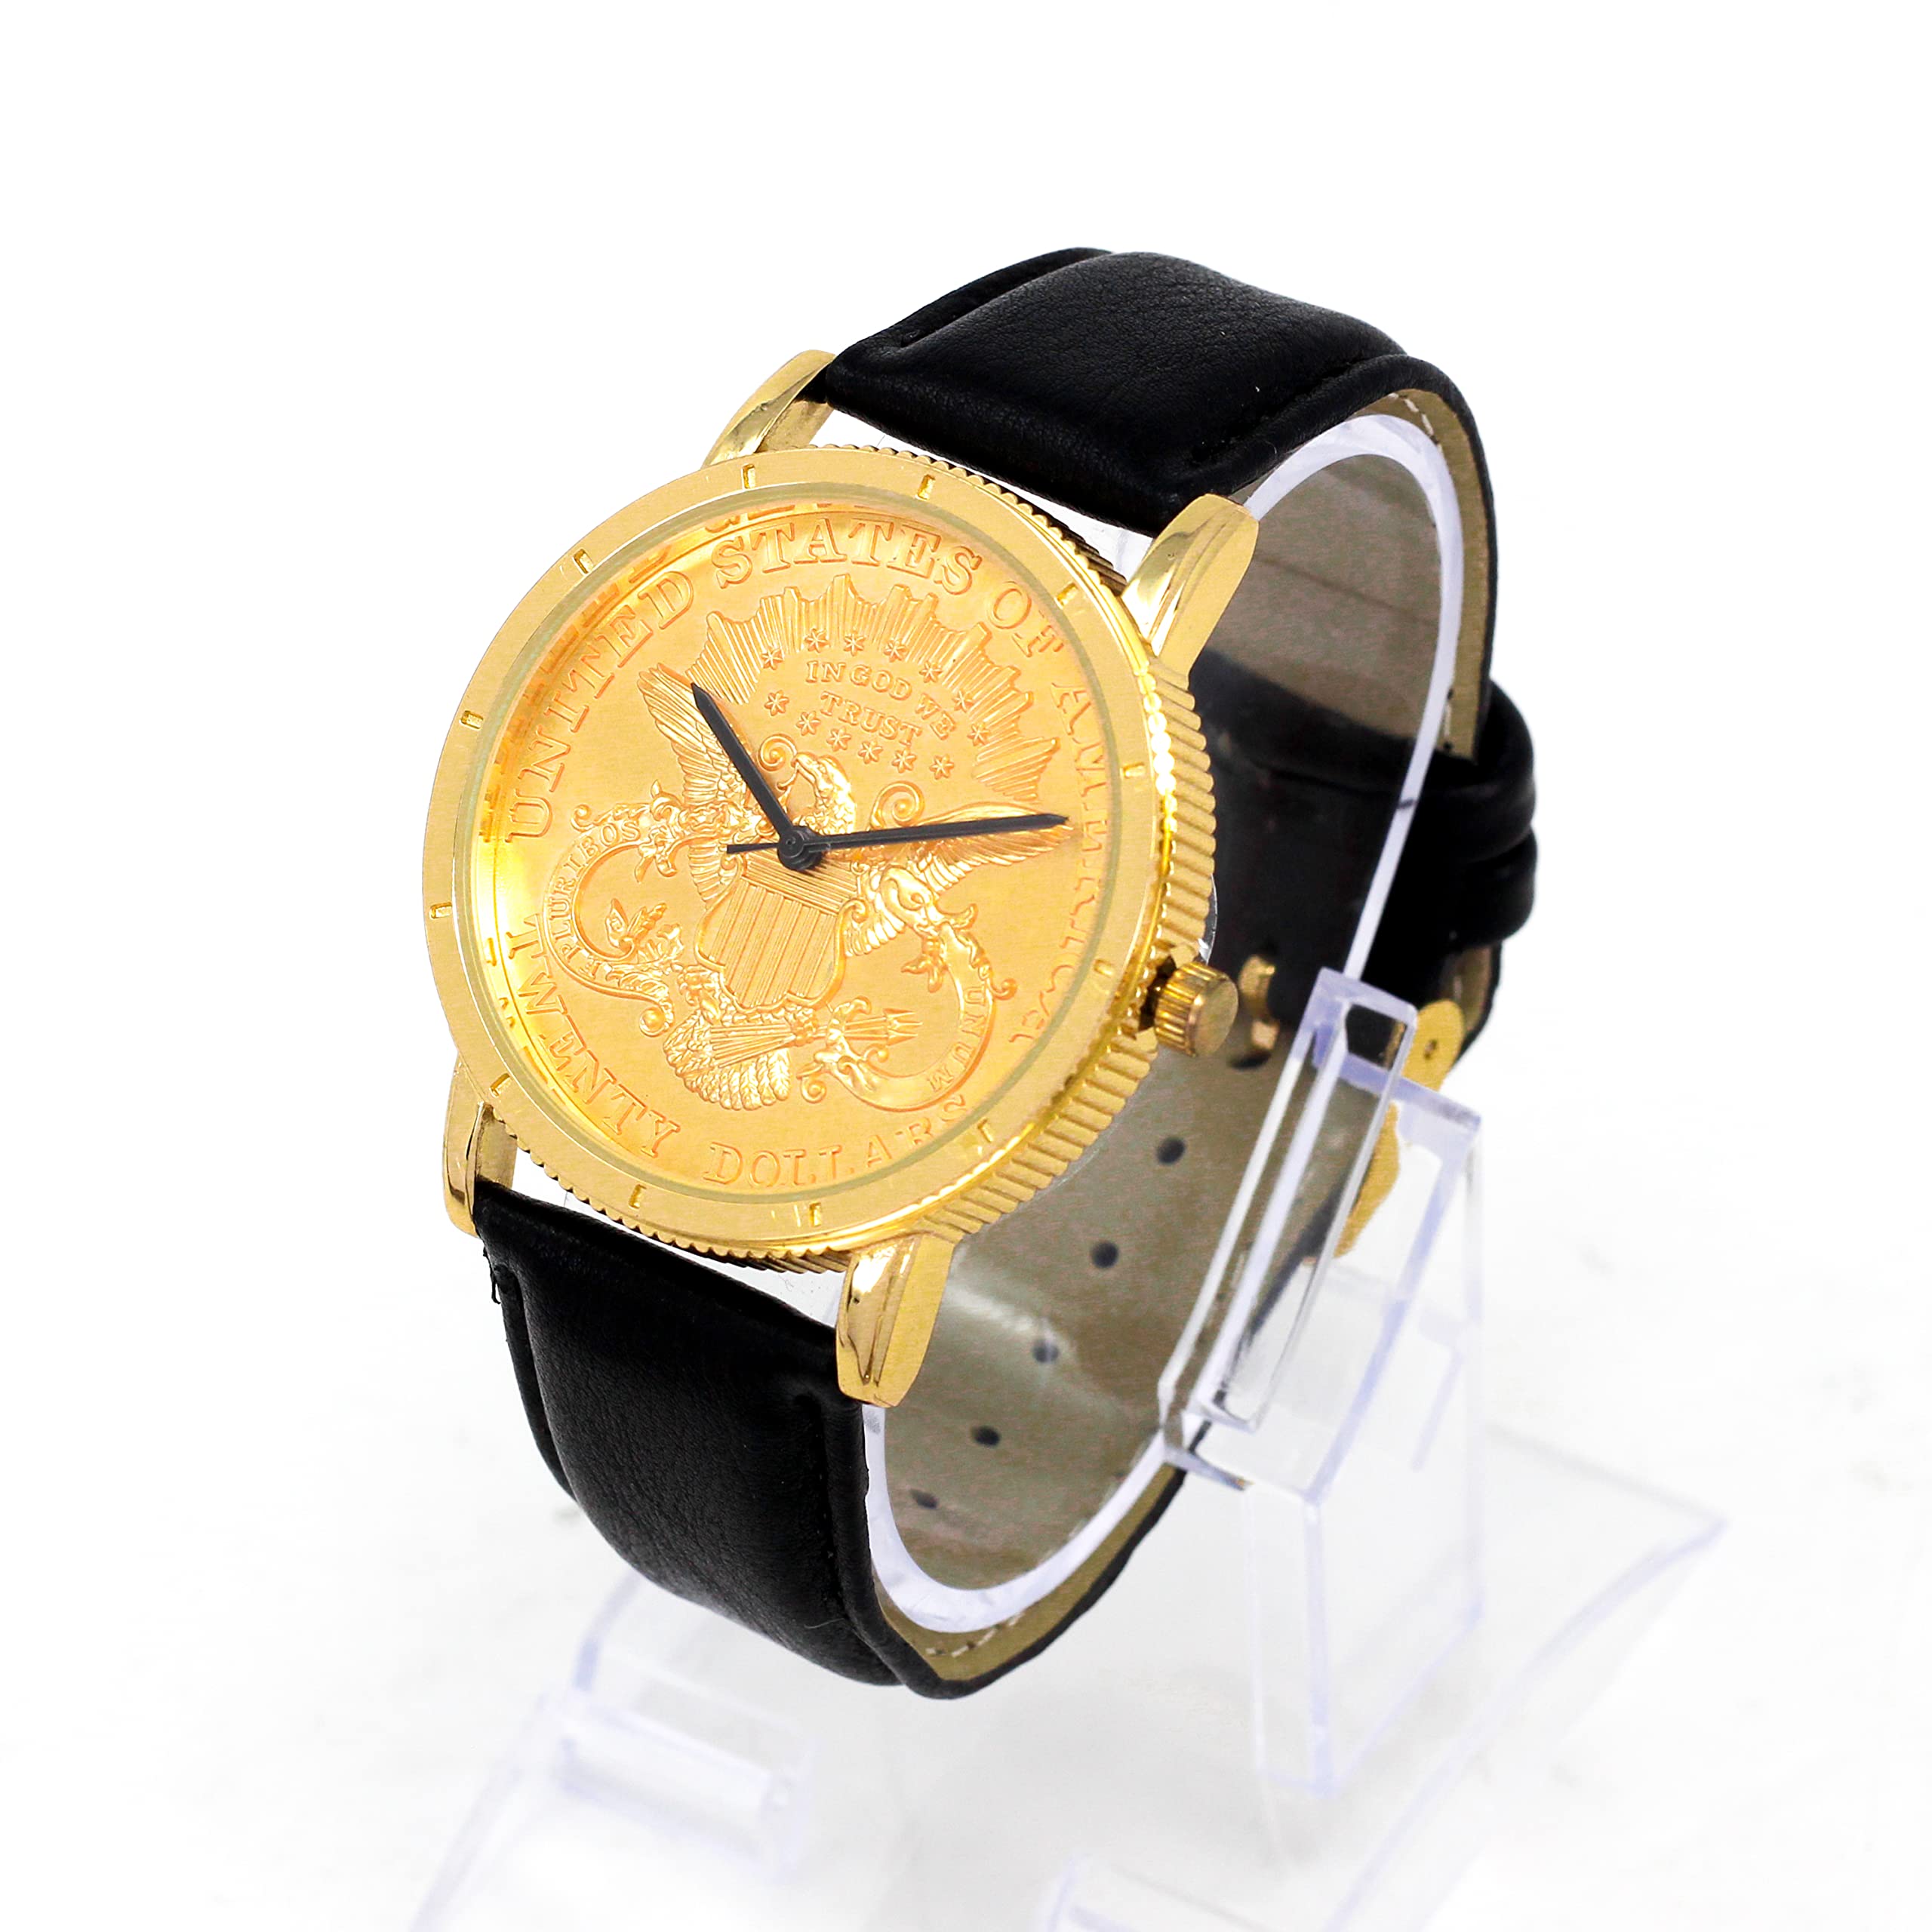 Men's Round Leather Band Watch 40mm Gold